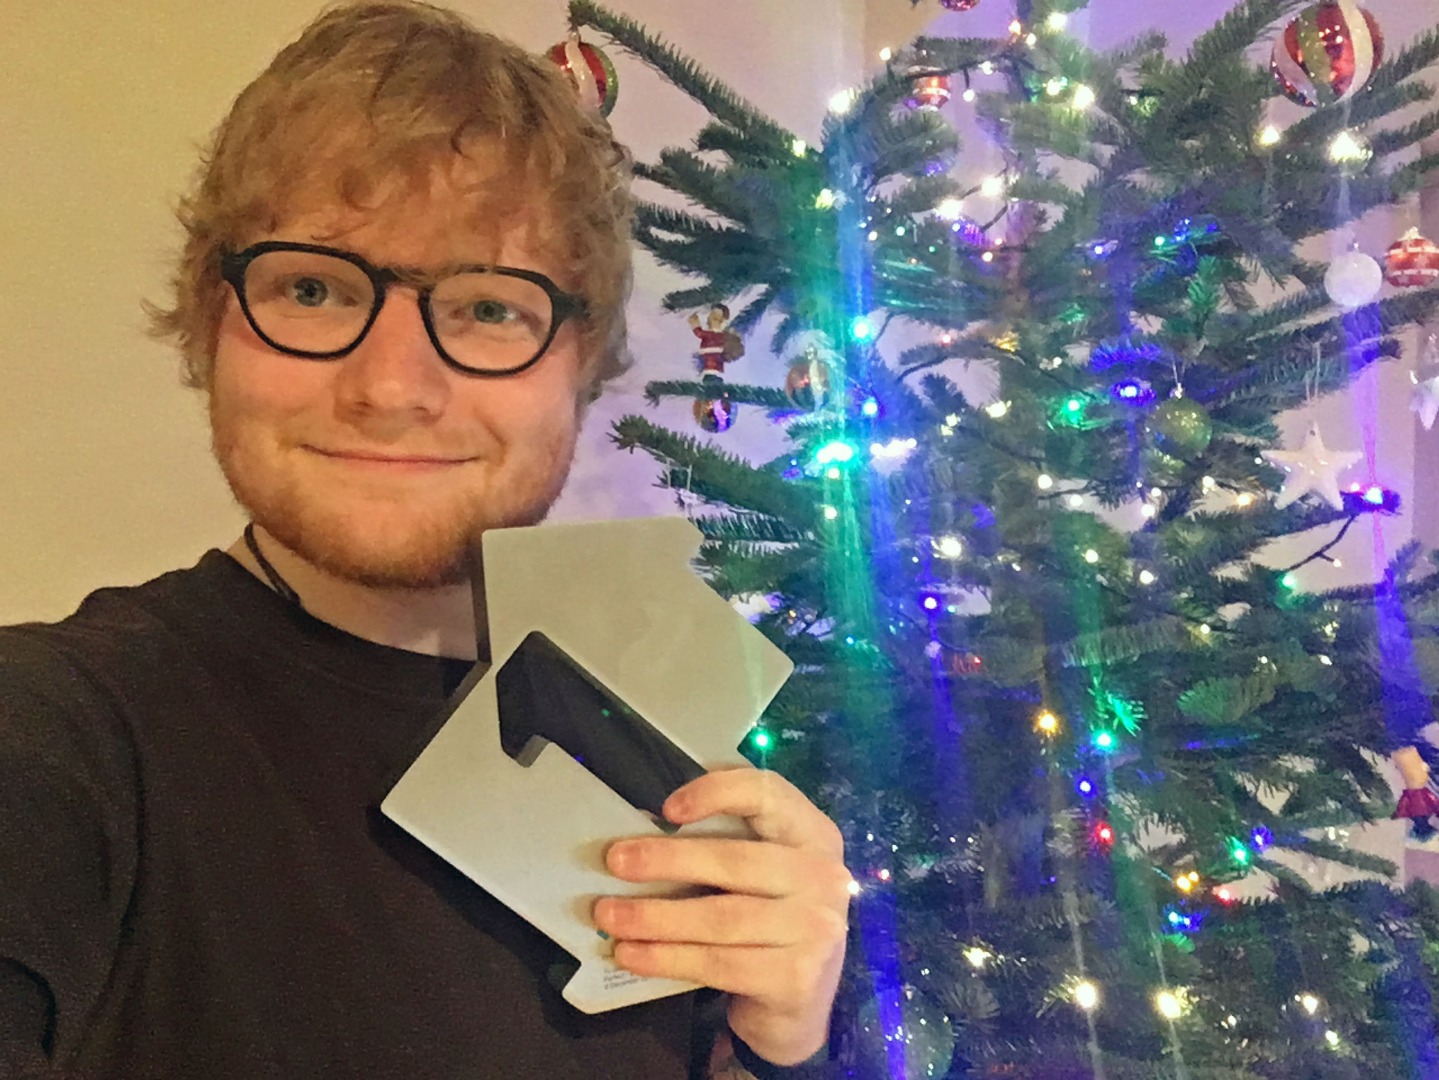 Ed Sheeran has scored the Christmas number one for 2017 (OfficialCharts.com)